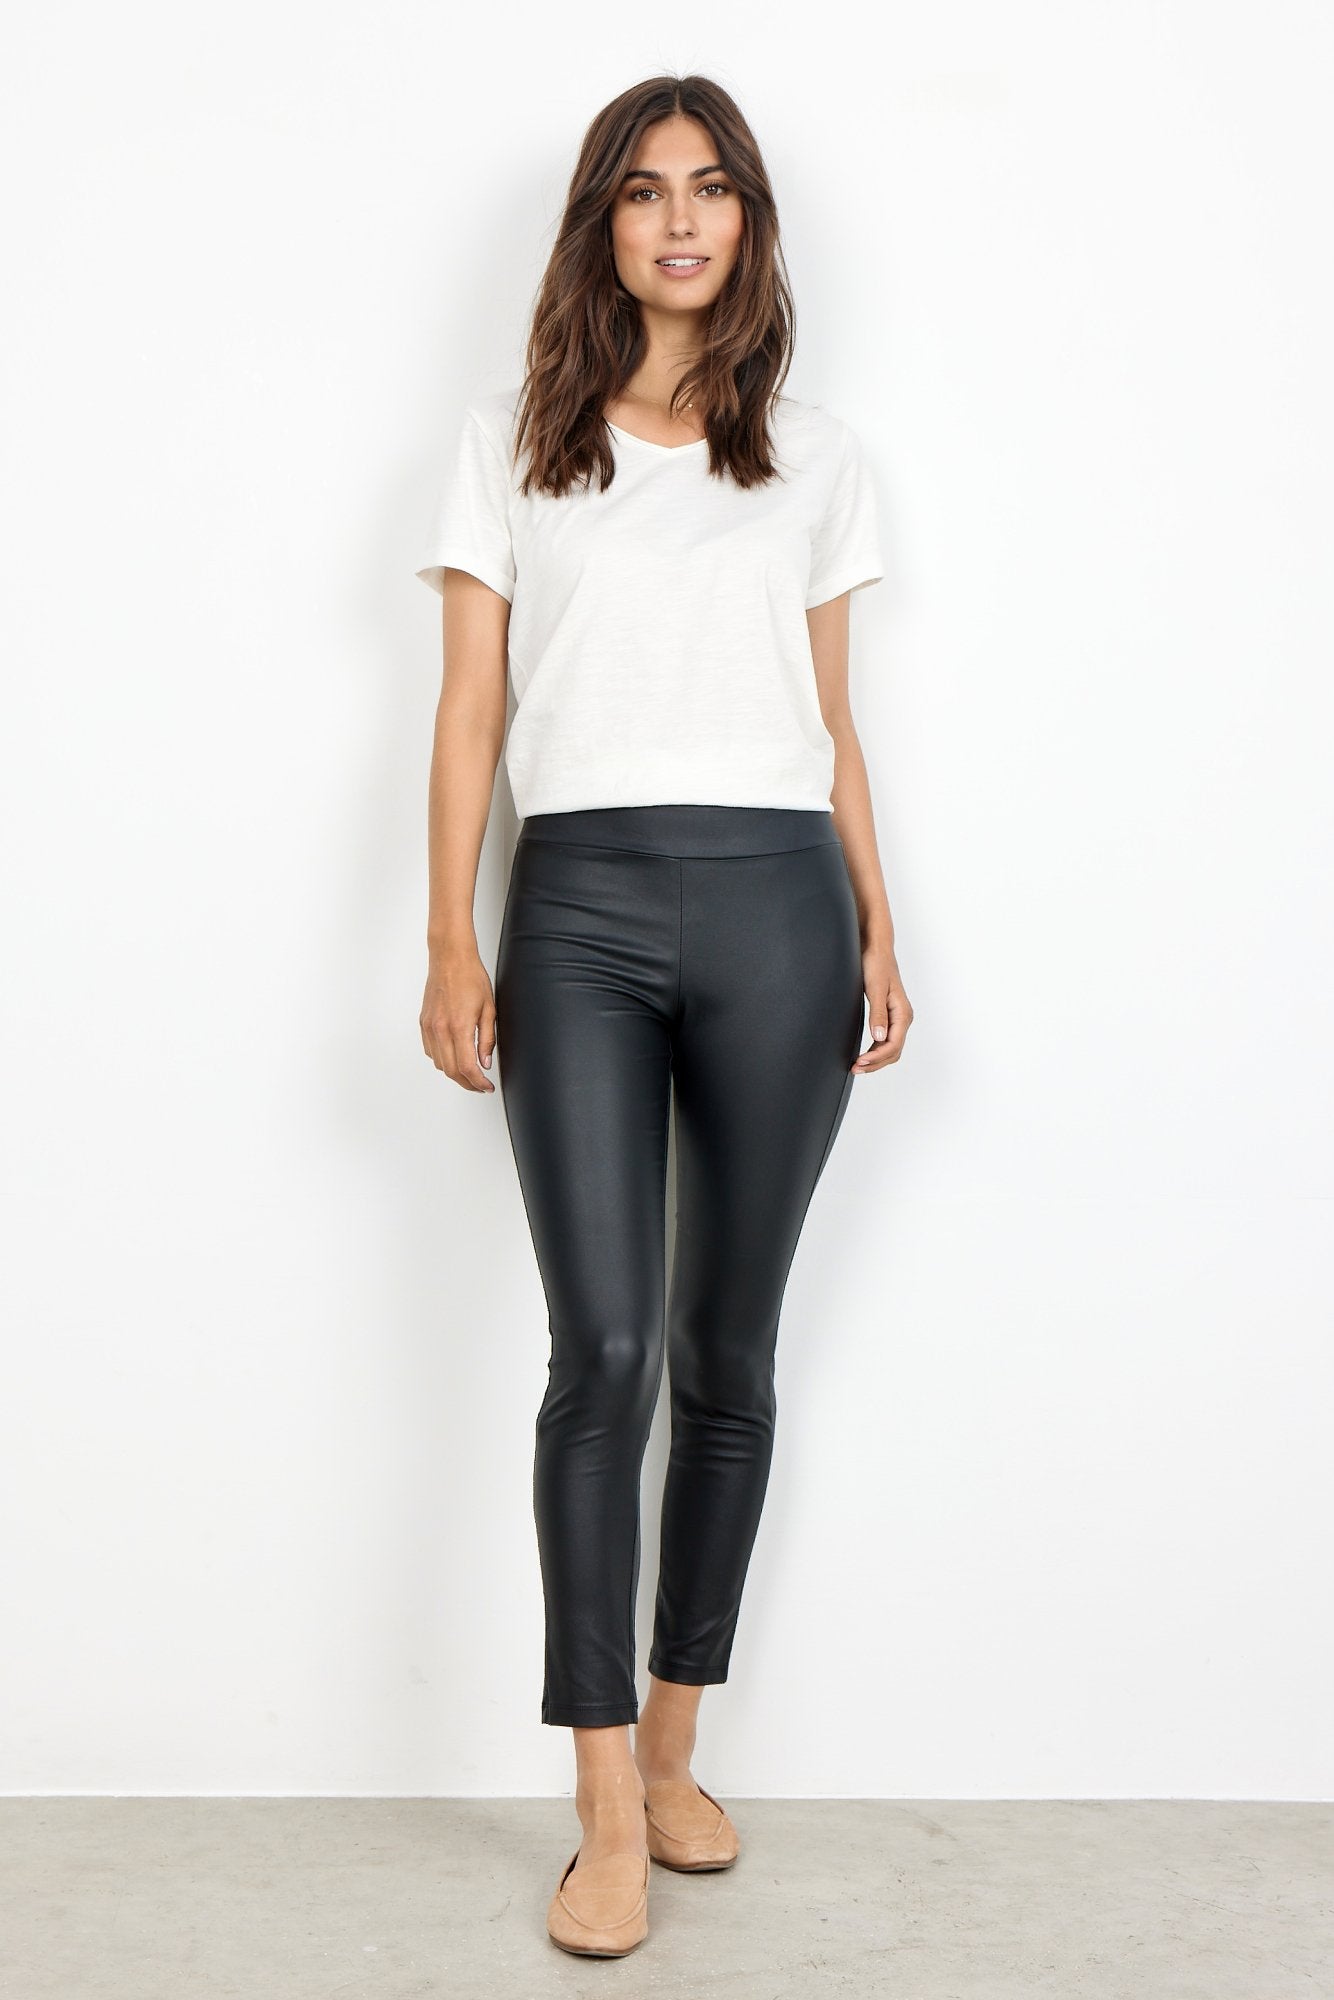 2-B | – Soyaconcept Pants soyaconcept from SC-PAM Black in soyaconcept